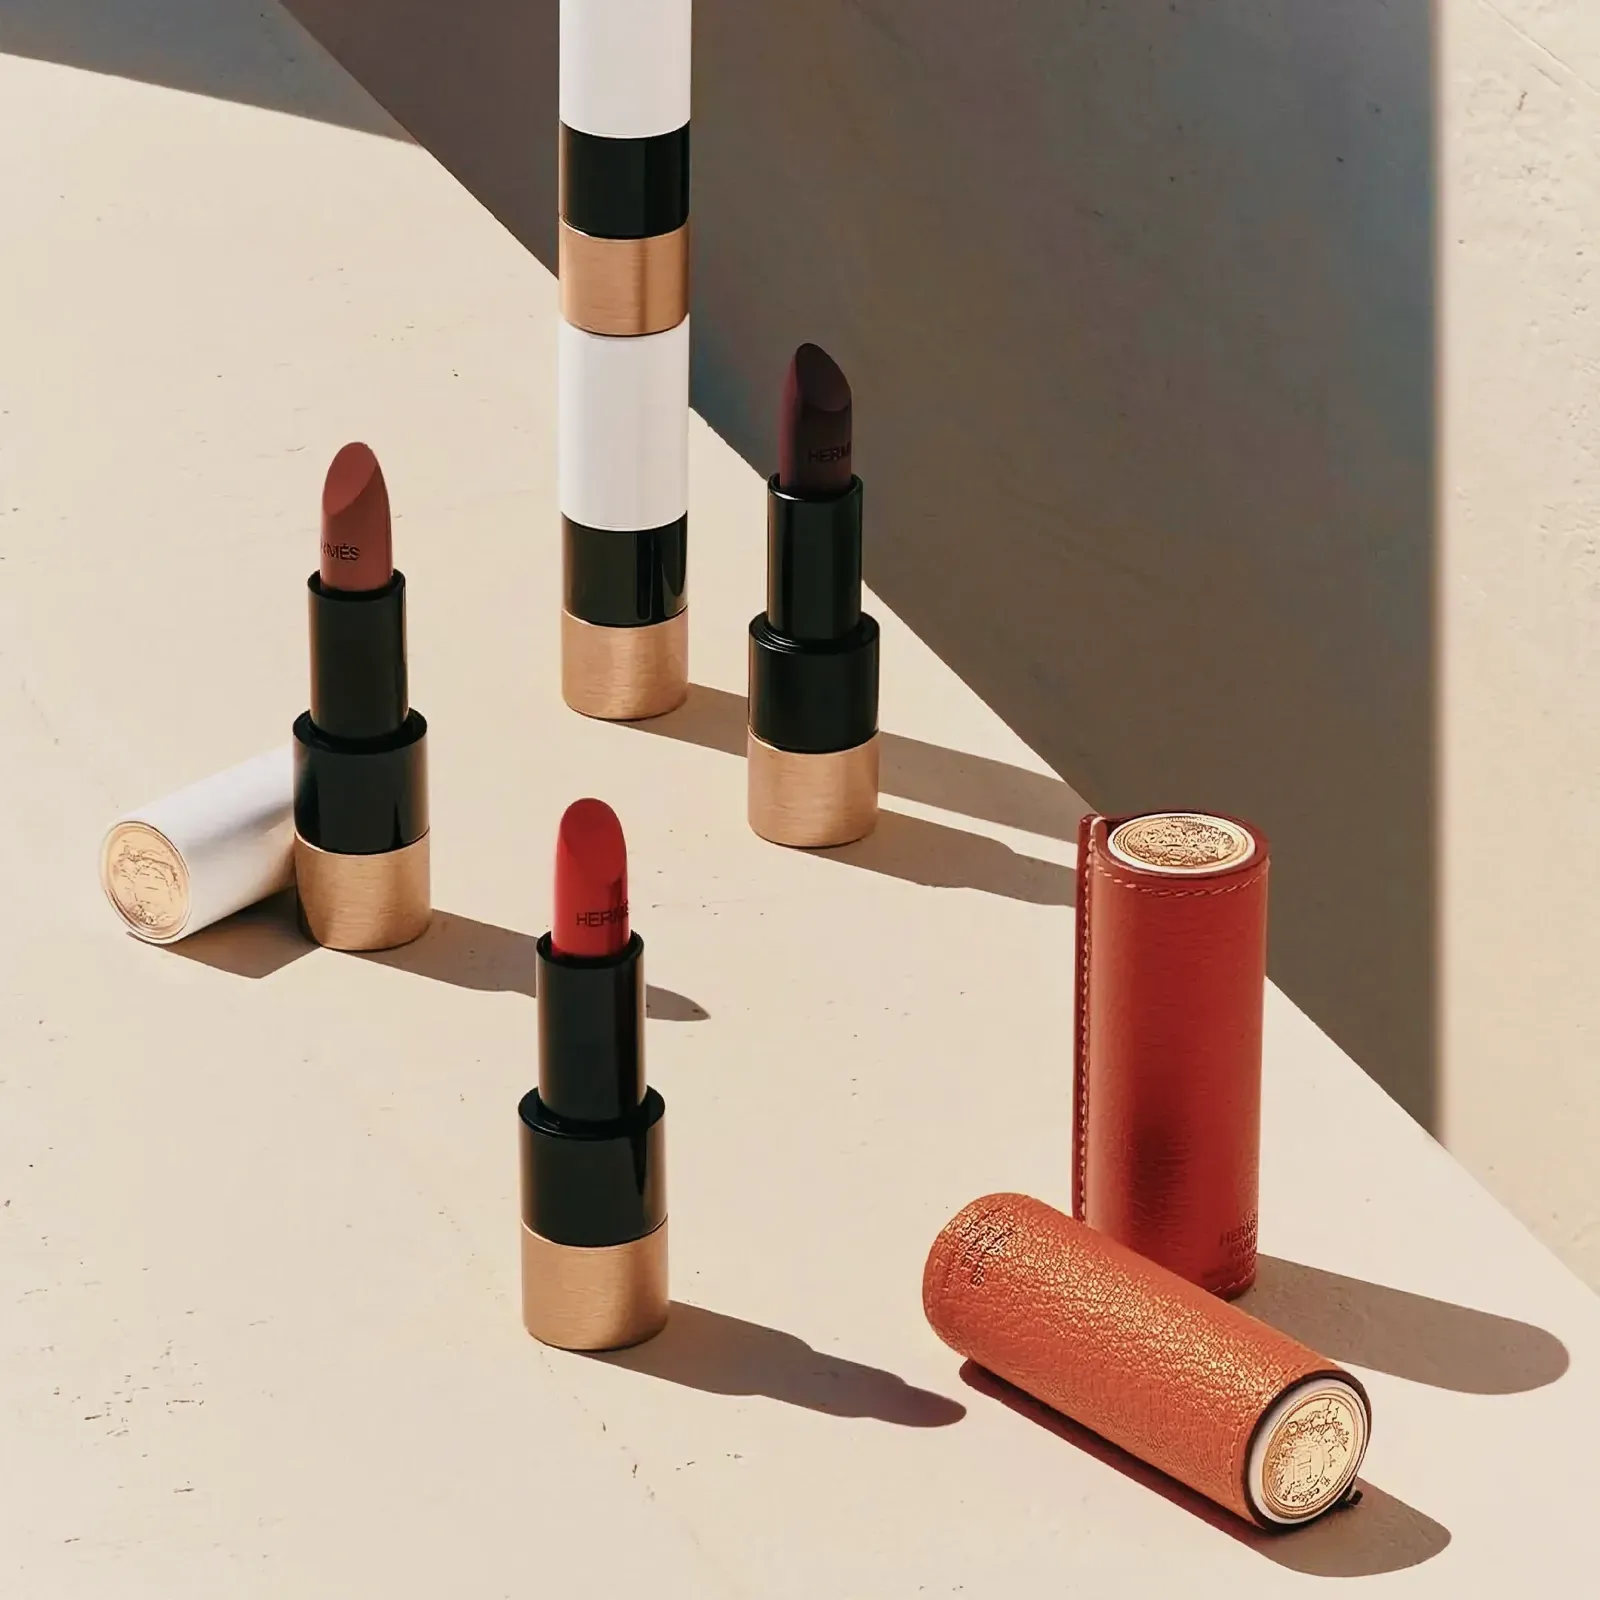 Collection of lipsticks on a table